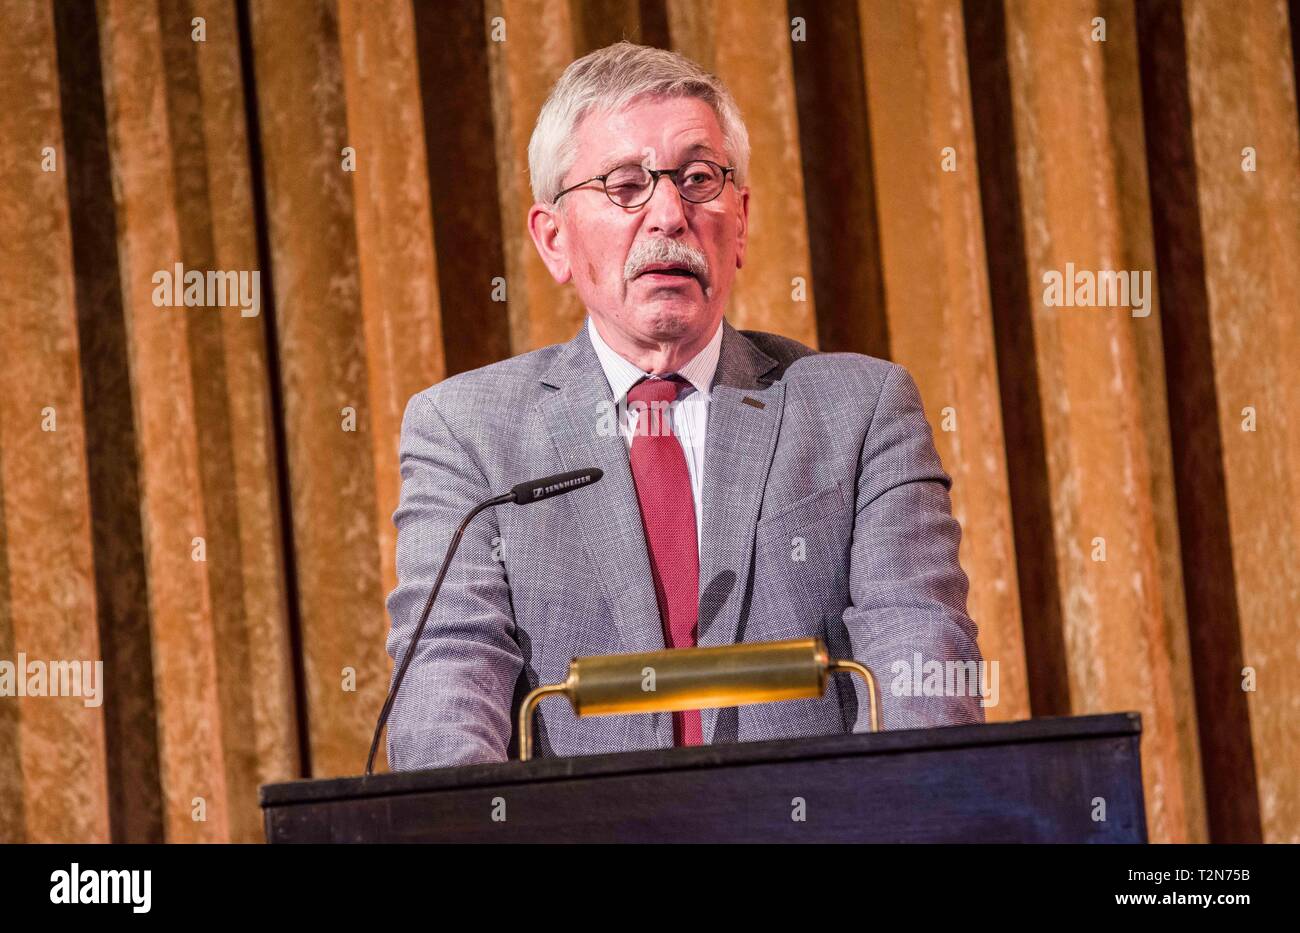 Munich, Bavaria, Germany. 3rd Apr, 2019. Controversial politician and book author THILO SARRAZIN held a speaking engagement in the Munich Kuenstlerhaus to approximately 100 fans, largely from right-extremist, islamophobic, far-right, and neo nazi circles, with some under Verfassungsschutz monitoring, such as Michael Stuerzenberger. Sarrazin held a discussion in support of his book ''die Fremde Uebernahme'' (''Hostile Takeover''). An accredited journalist was also held by security and insulted as ''from Antifa'', which then resulted in hostilities directed by others towards him. Furthermor Stock Photo